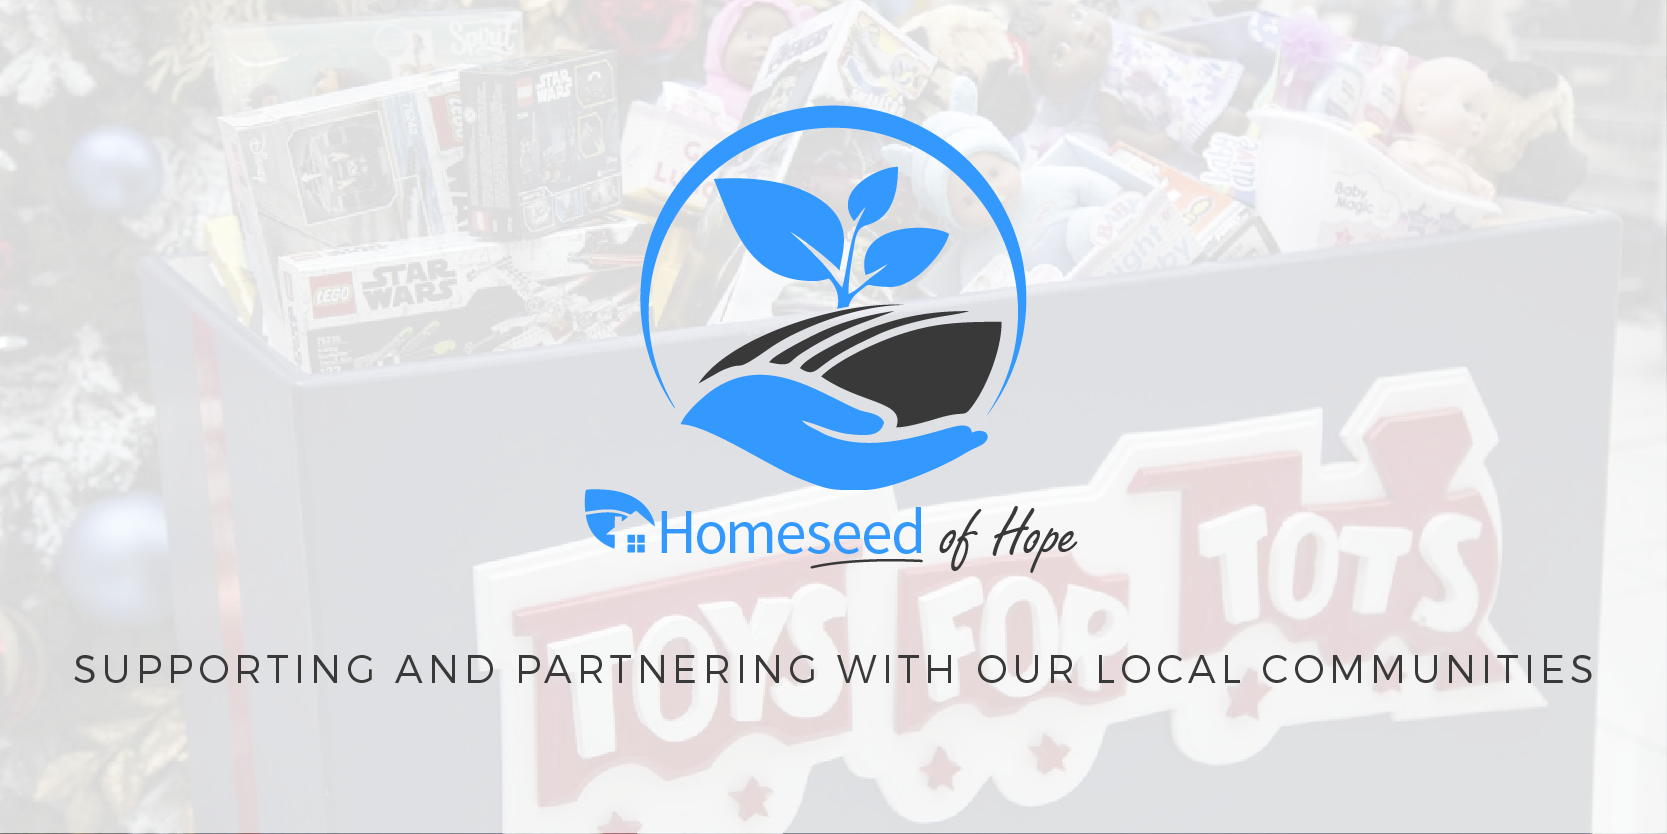 Homeseed of Hope – Toys for Tots